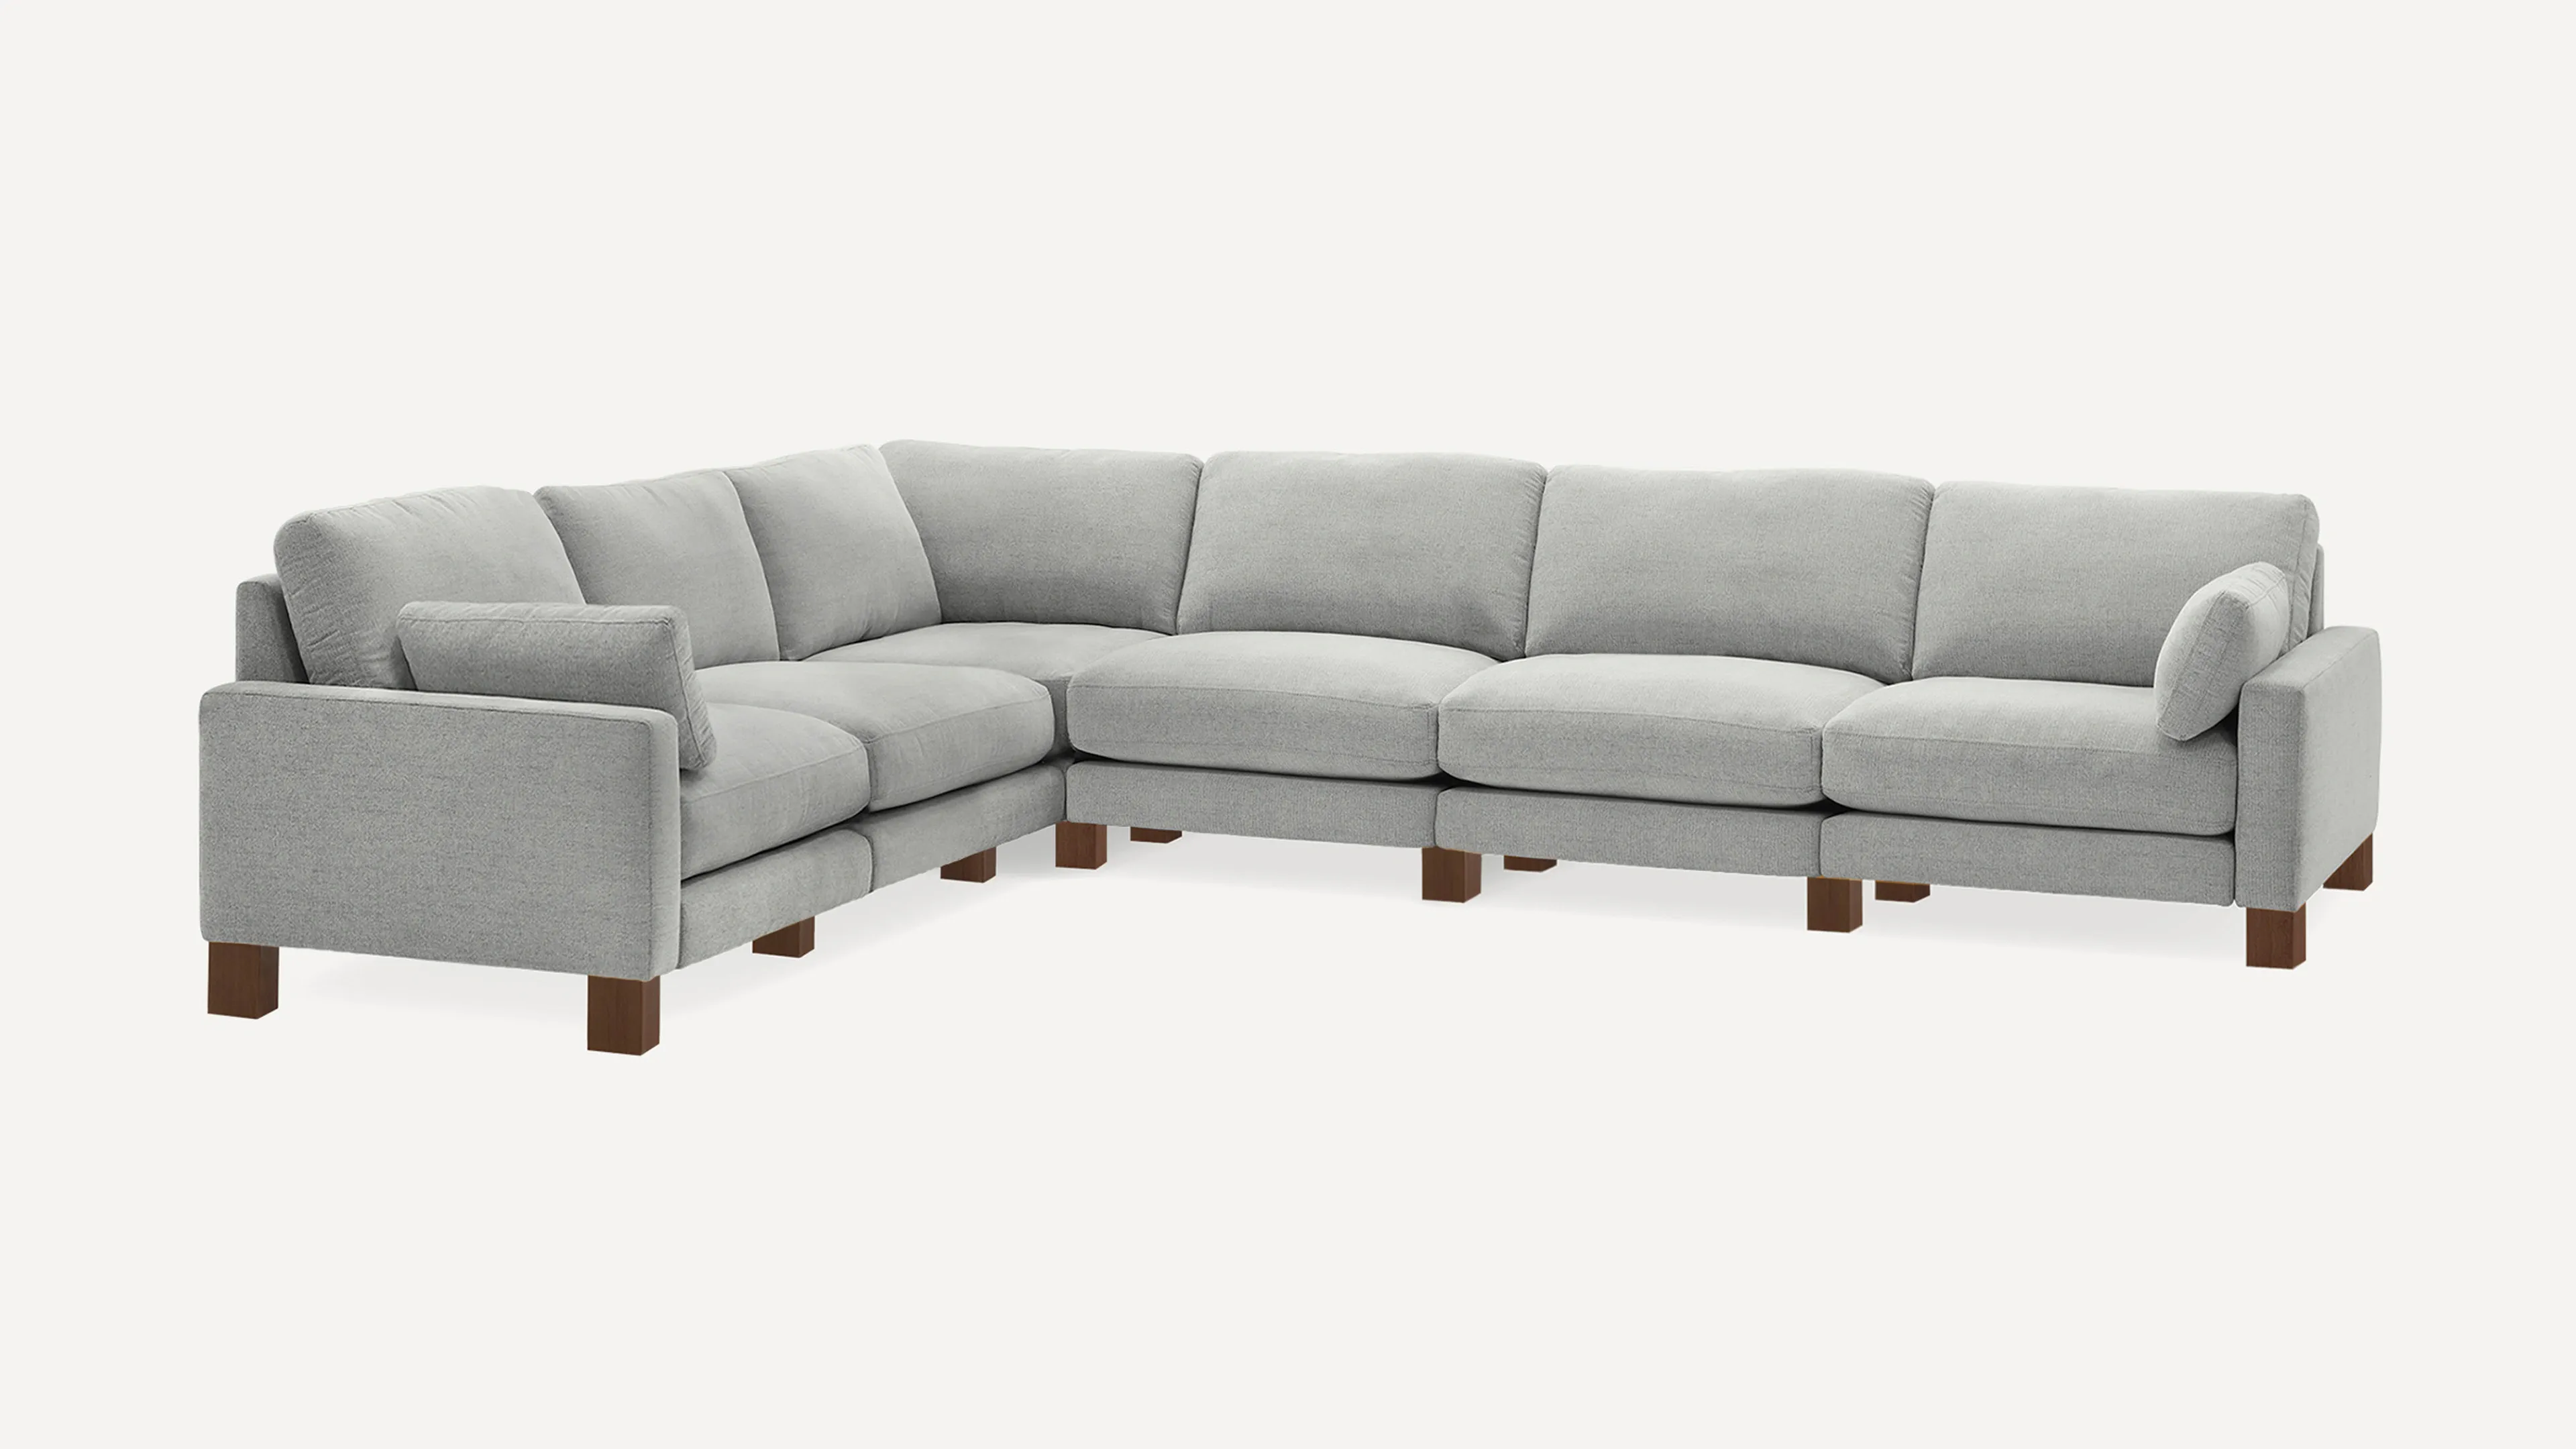 Union 6-Seat Sectional